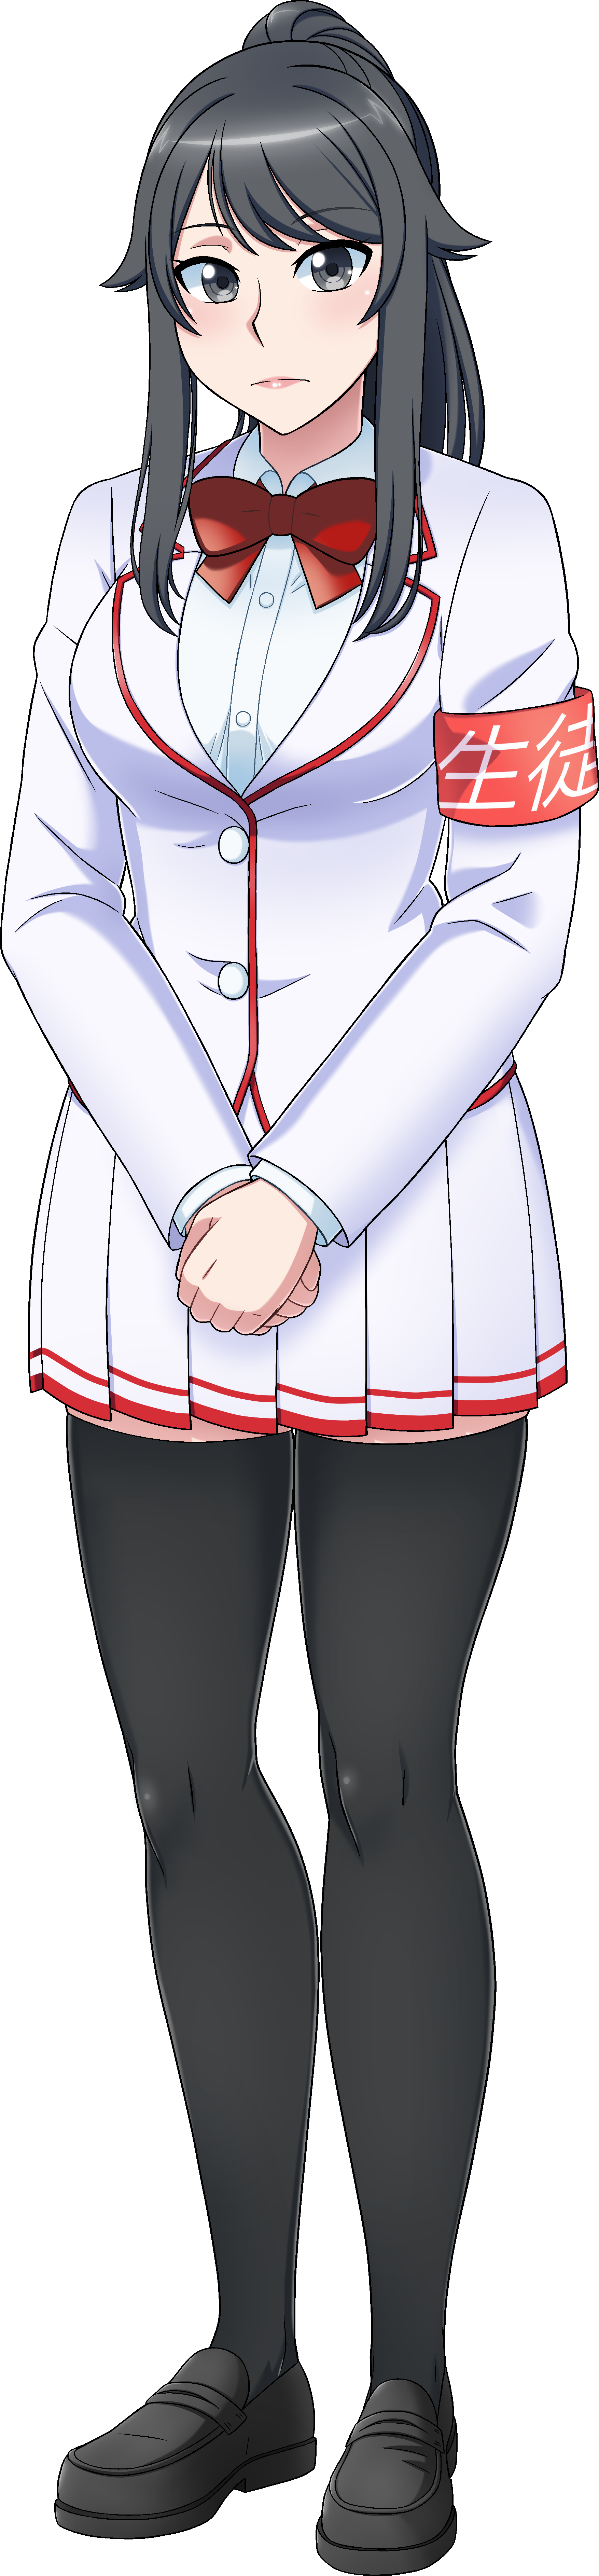 Yandere-chan-council-full.png